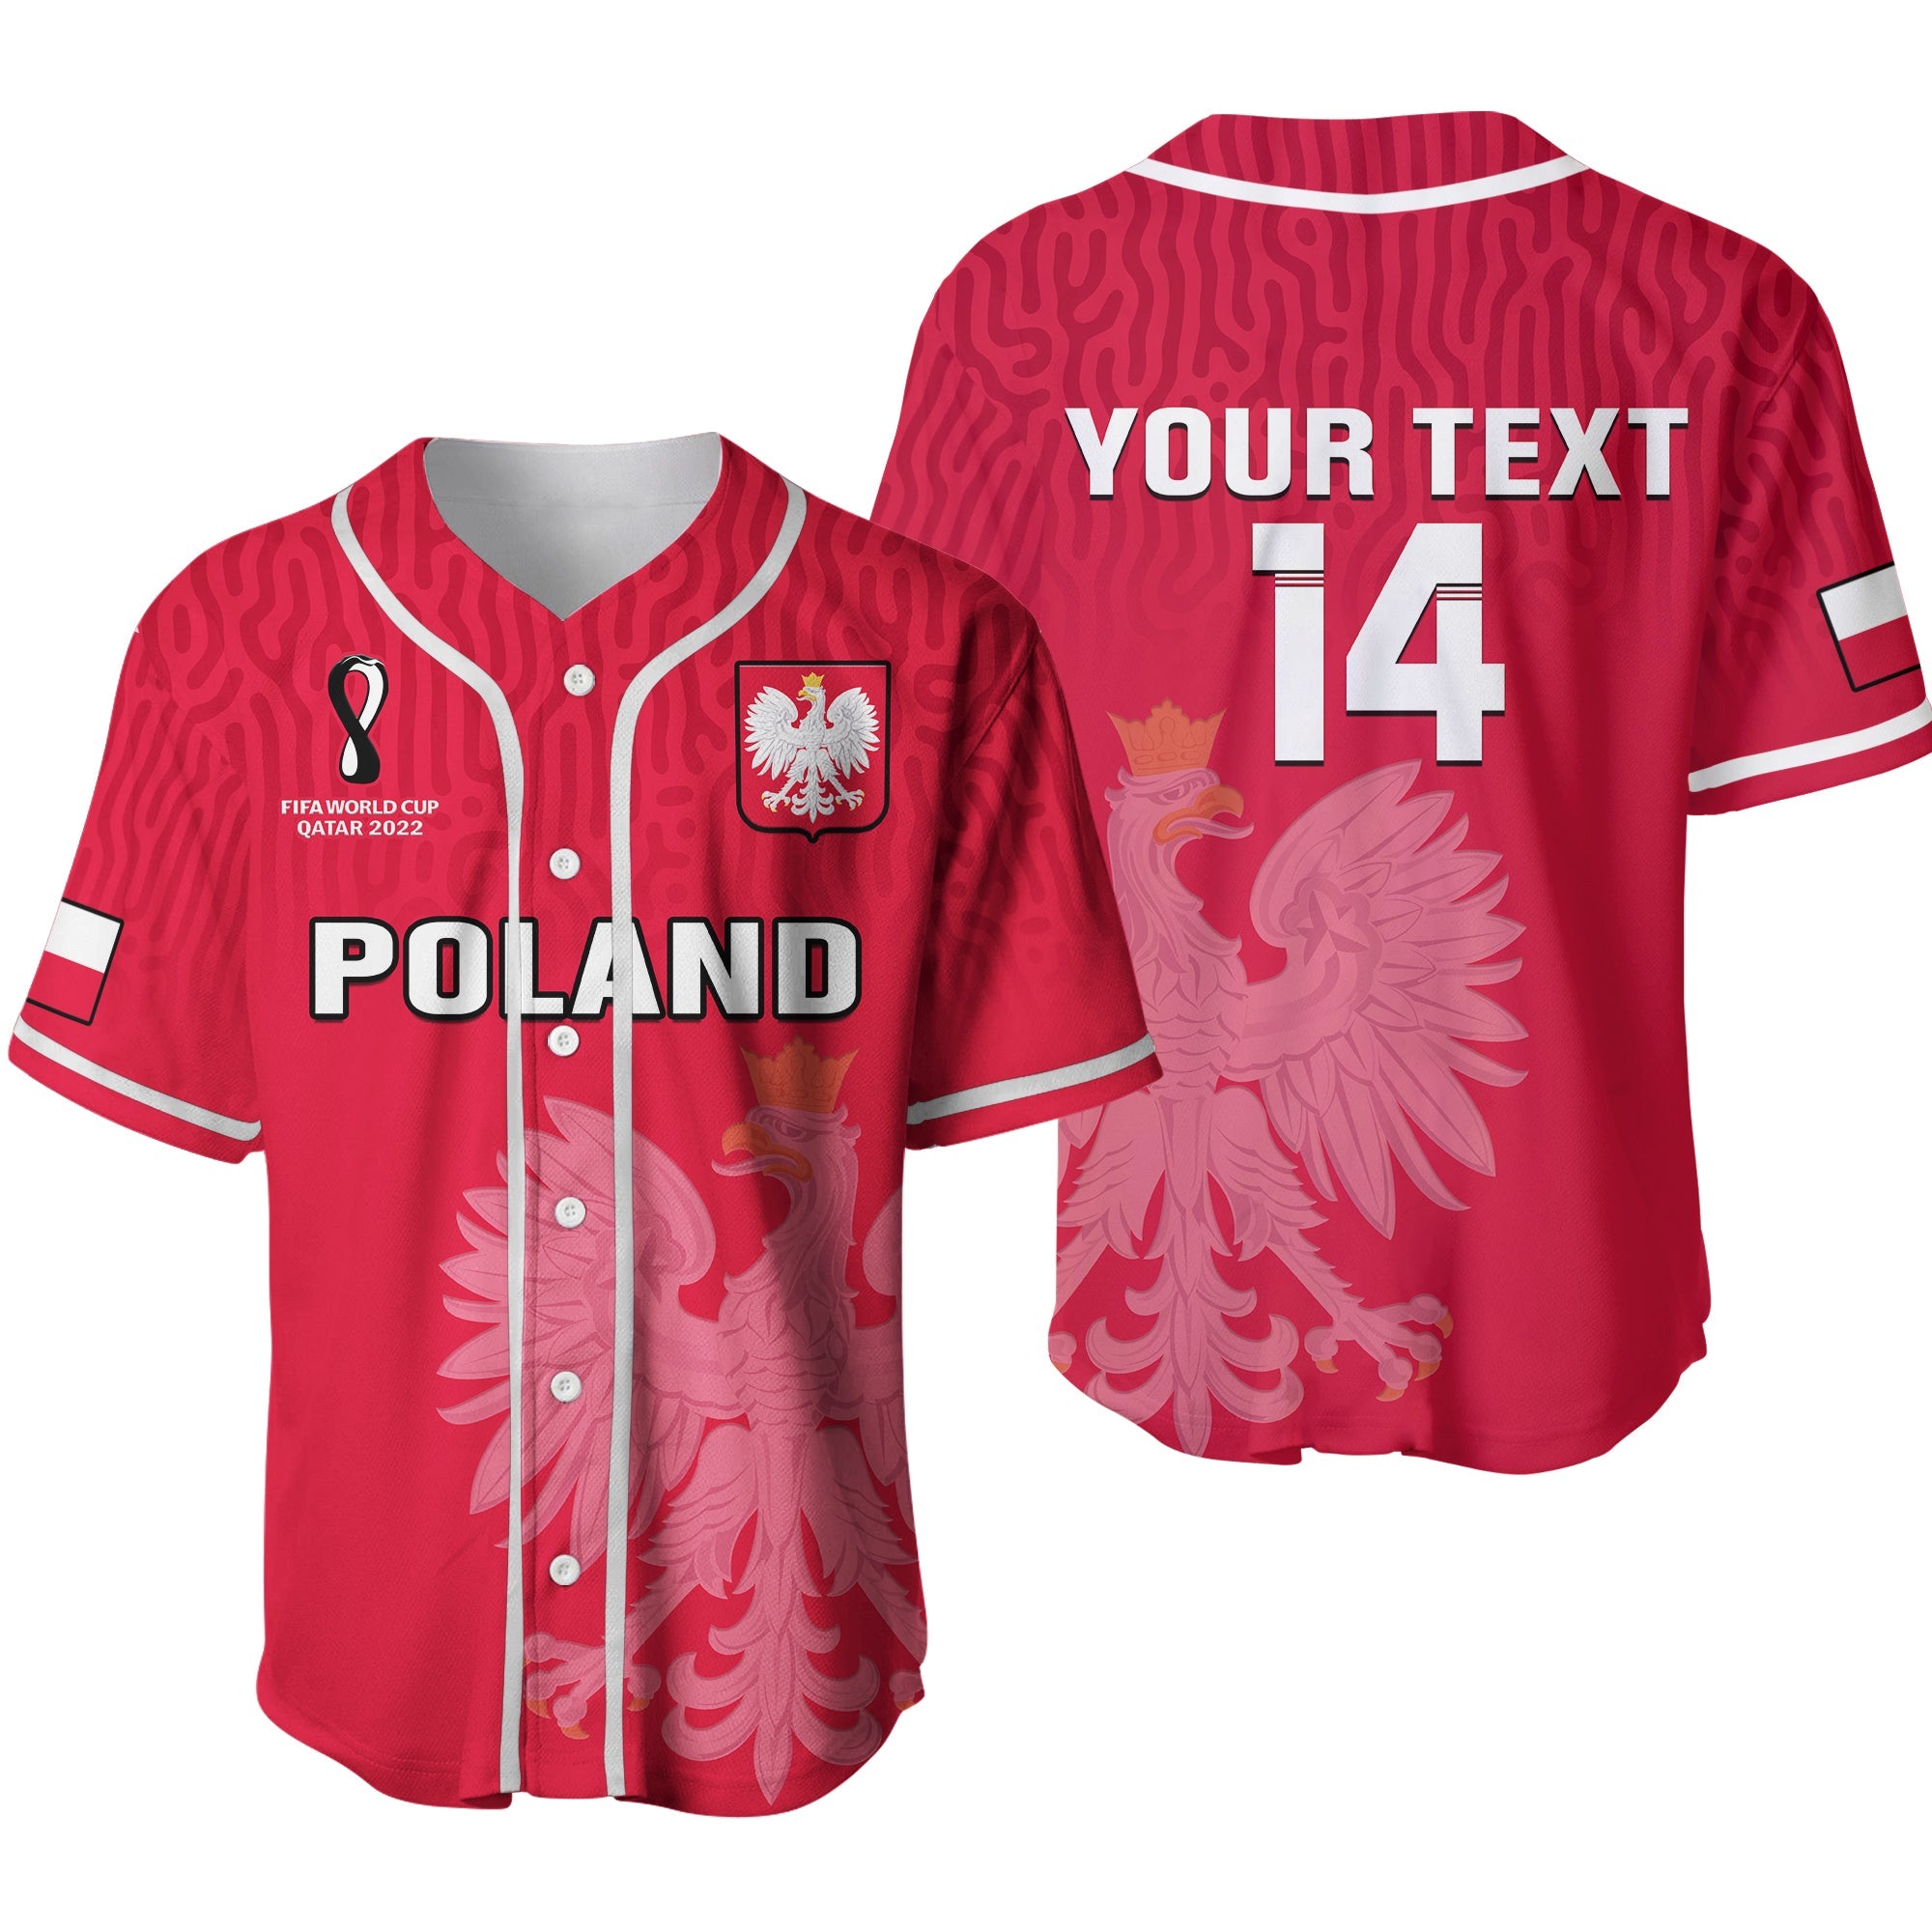 custom-text-and-number-poland-football-baseball-jersey-polska-world-cup-2022-red-ver02